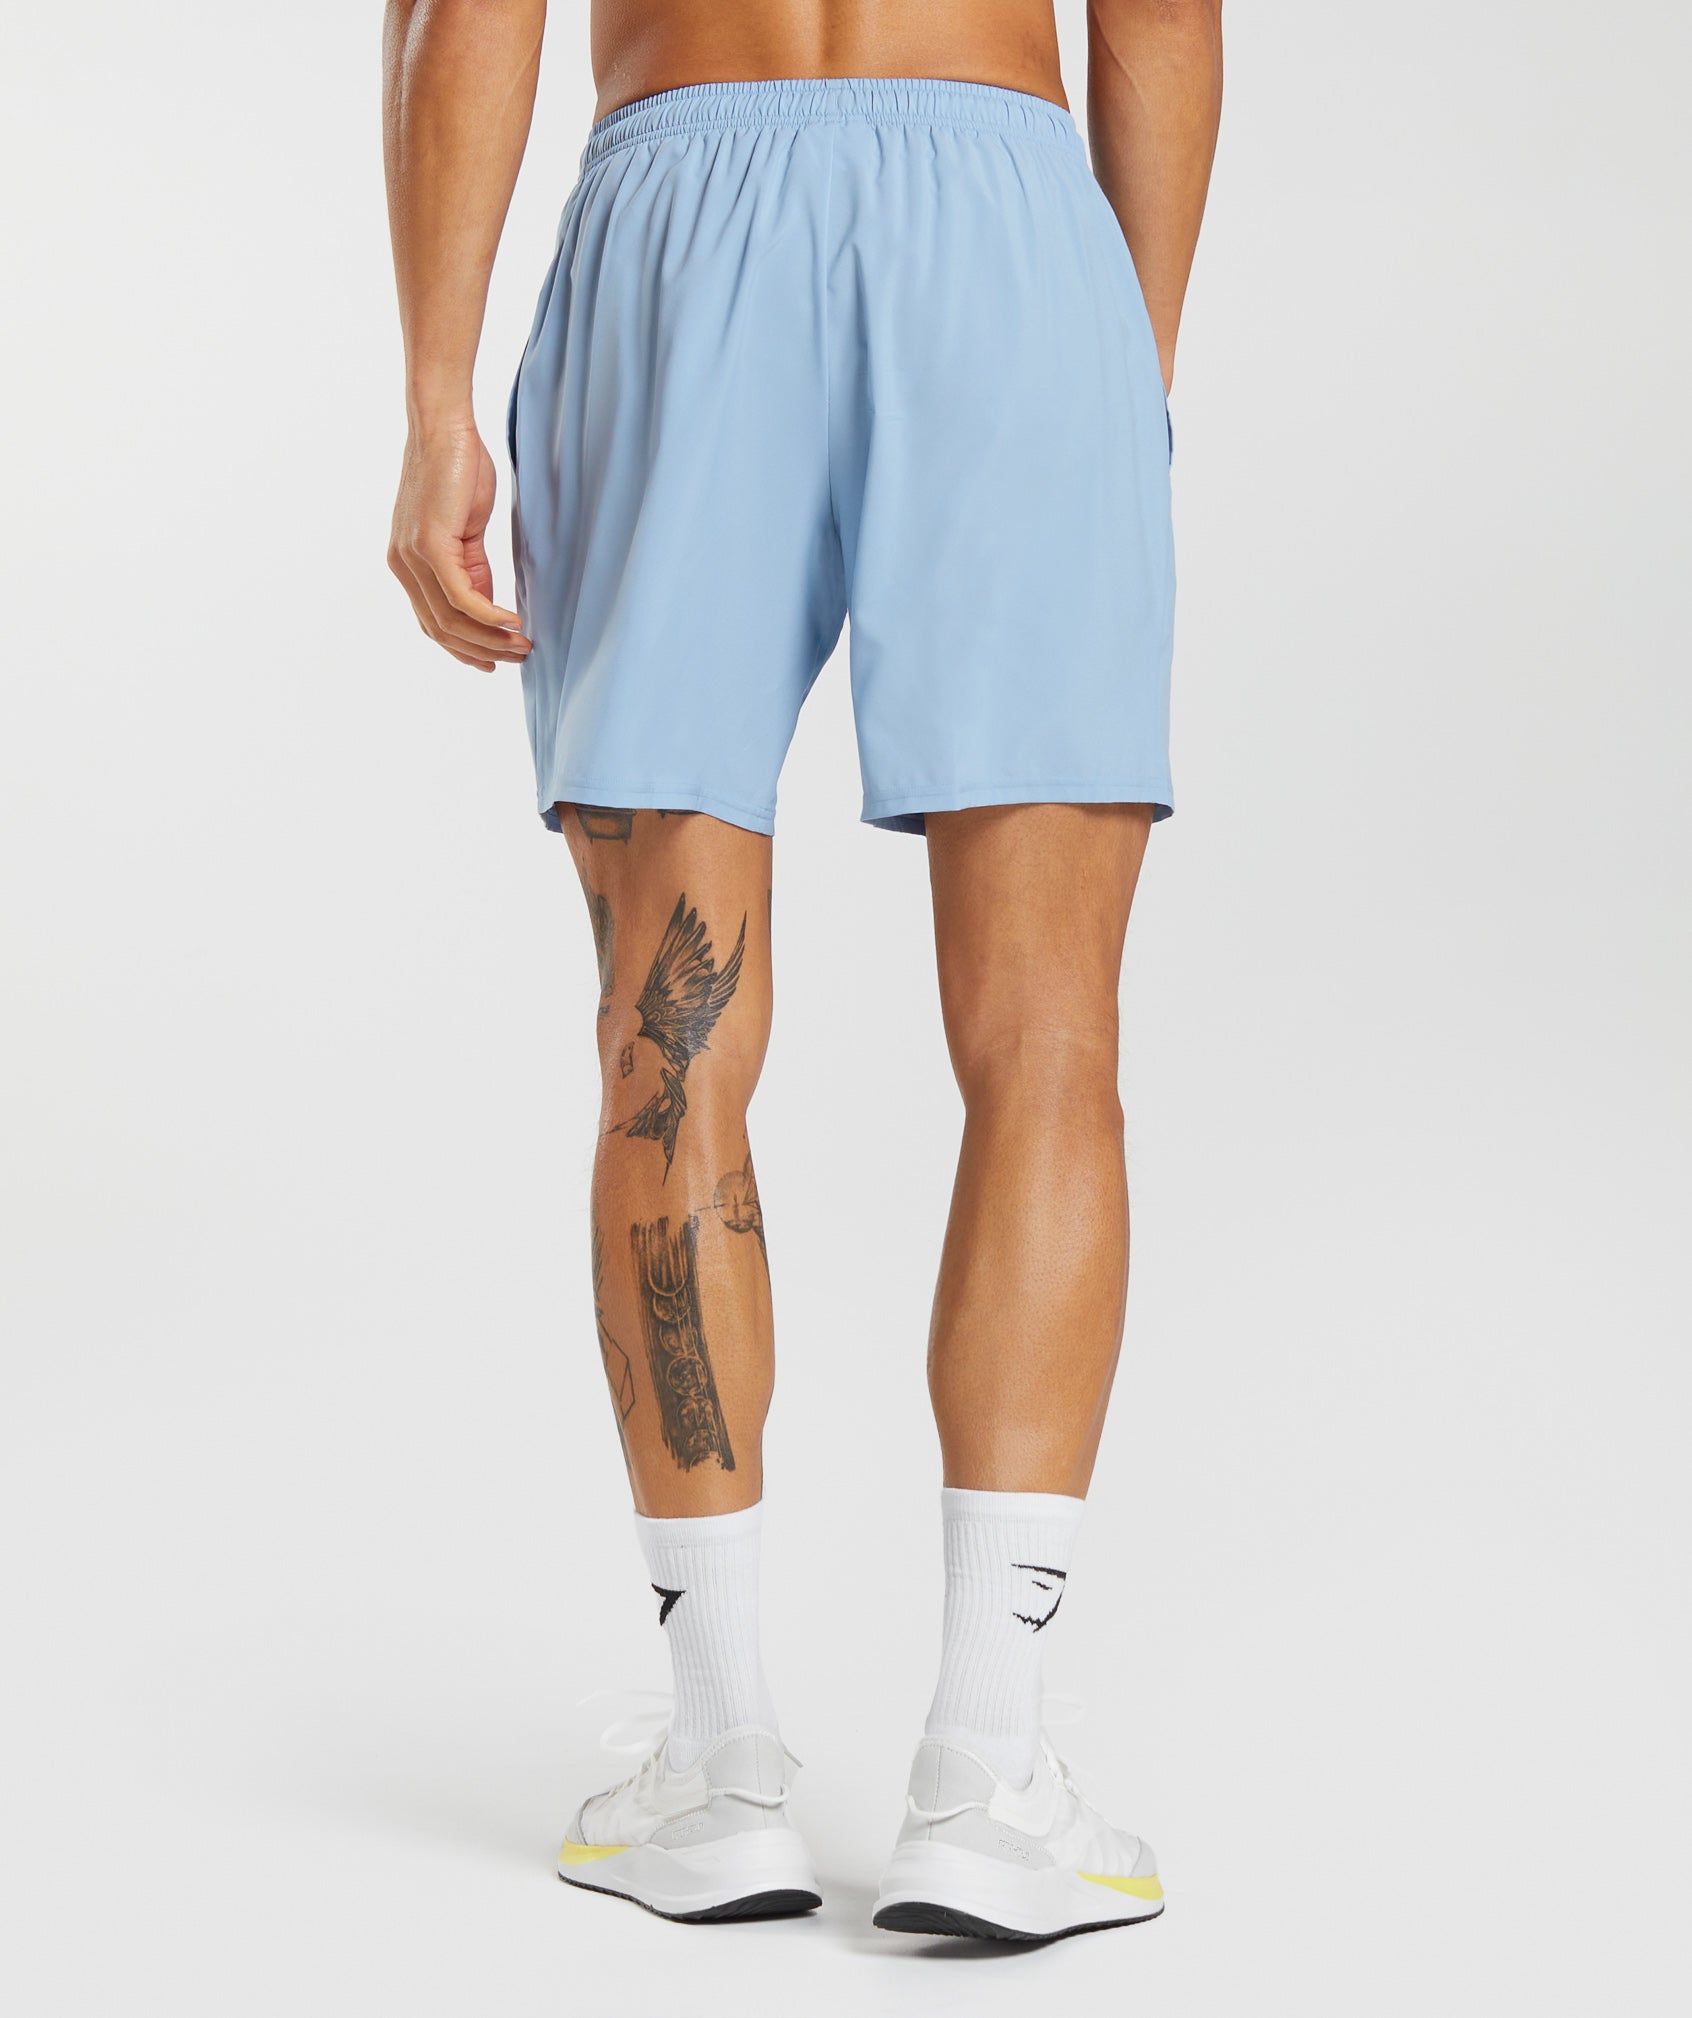 Arrival 7" Shorts in Ozone Blue